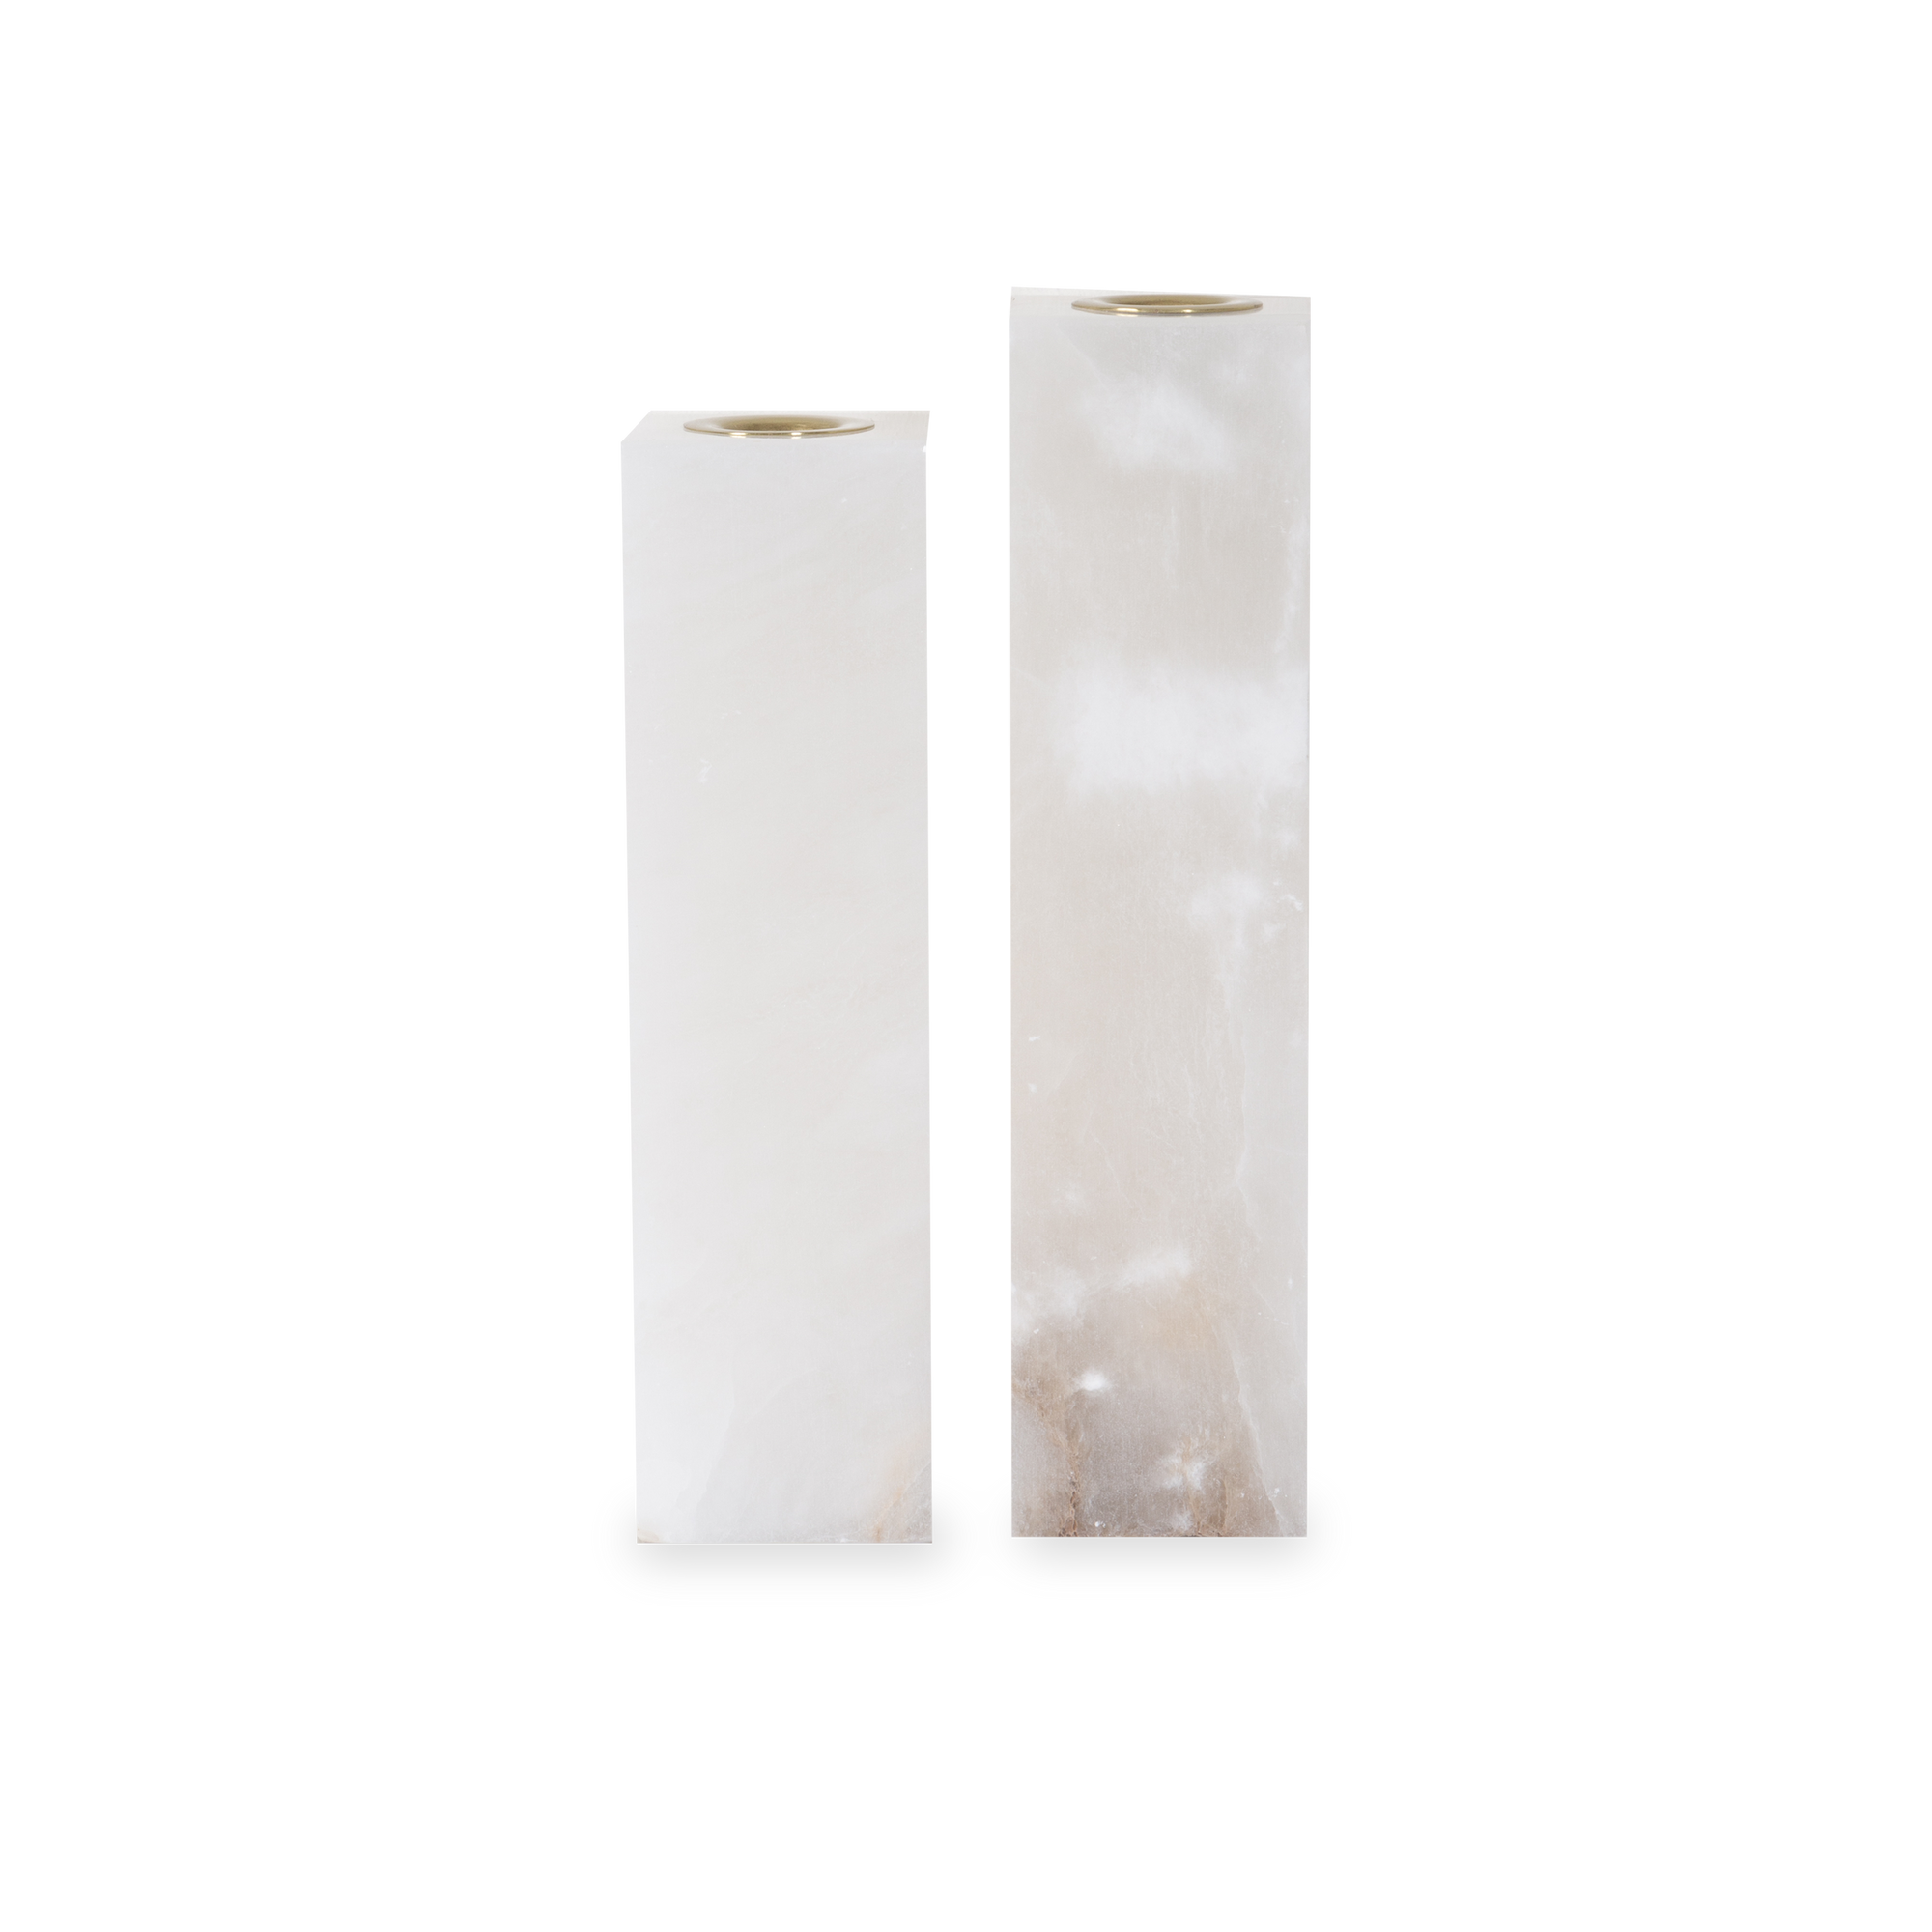 The Alabaster and Brass Candleholder feature a brass-finished stainless-steel holder and a unique alabaster body.